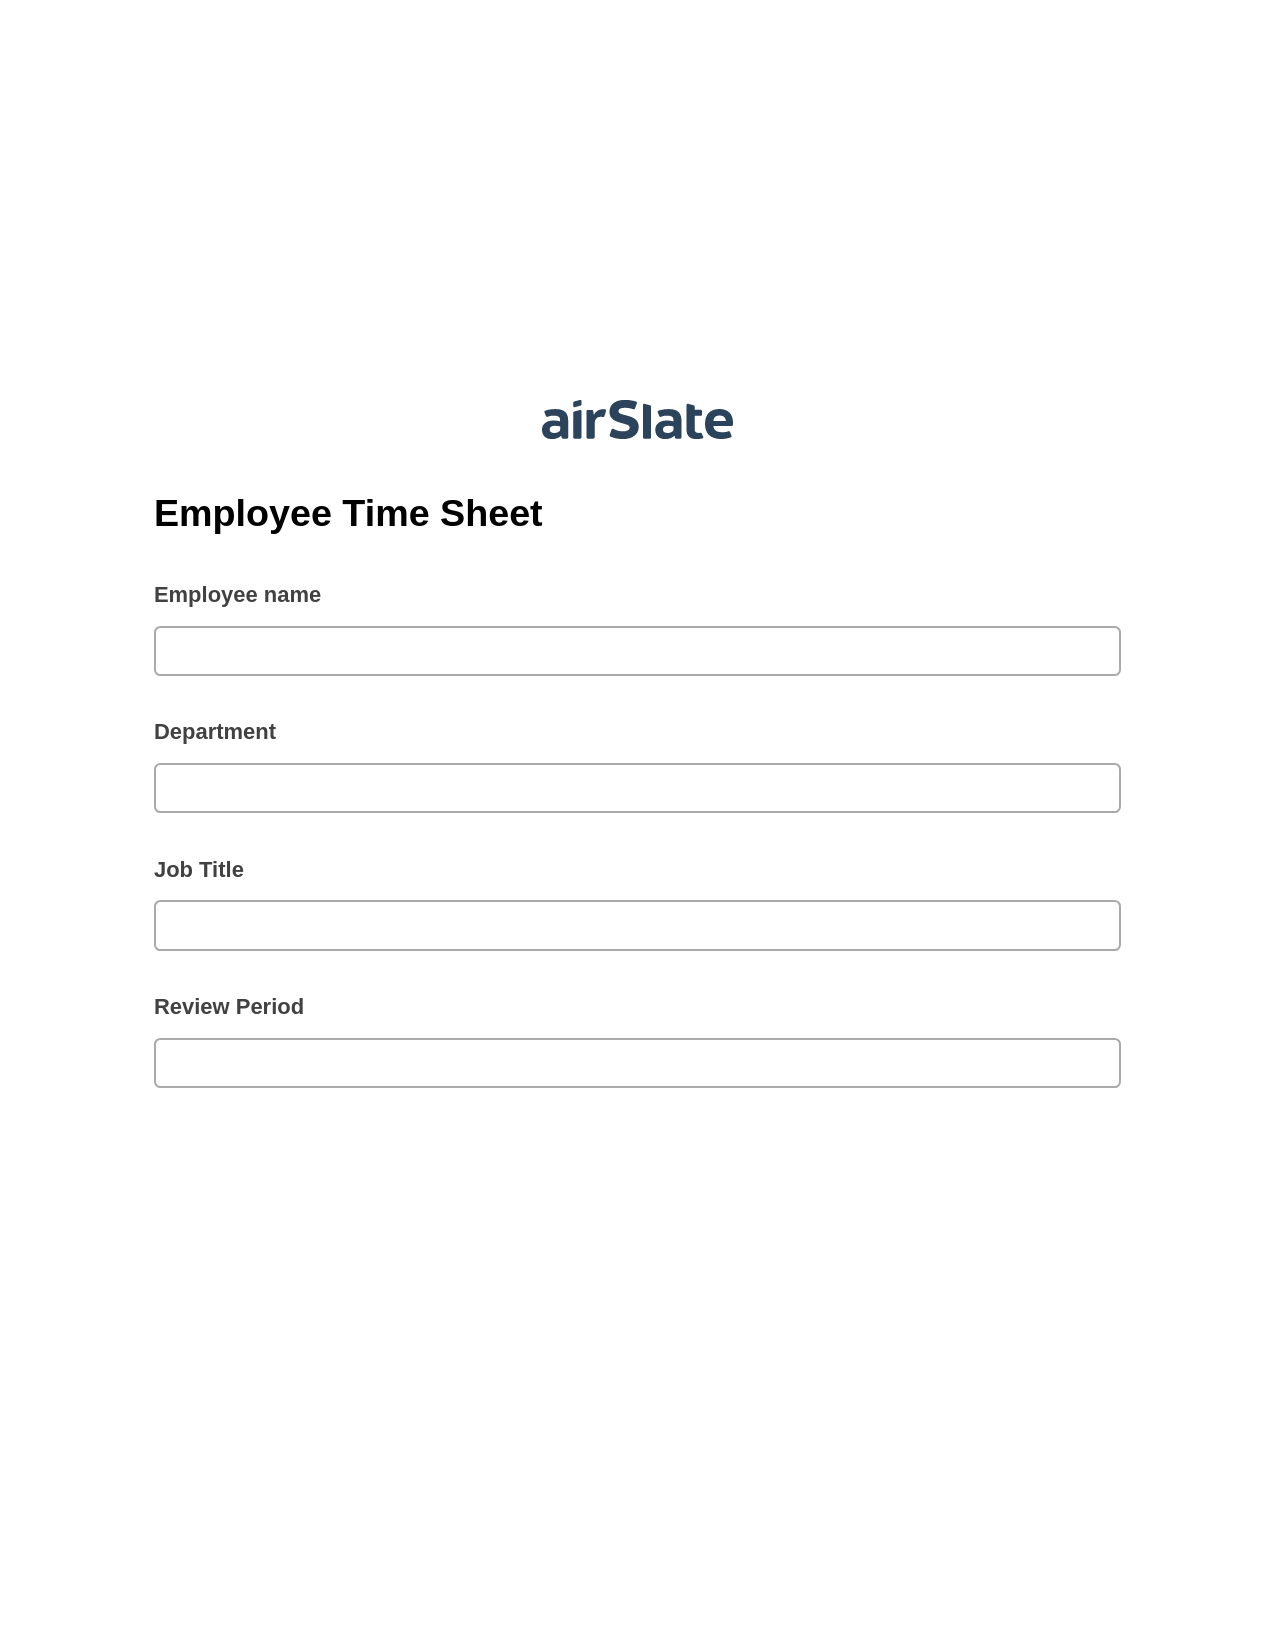 Multirole Employee Time Sheet Pre-fill Dropdowns from CSV file Bot, Create slate addon, Export to Excel 365 Bot